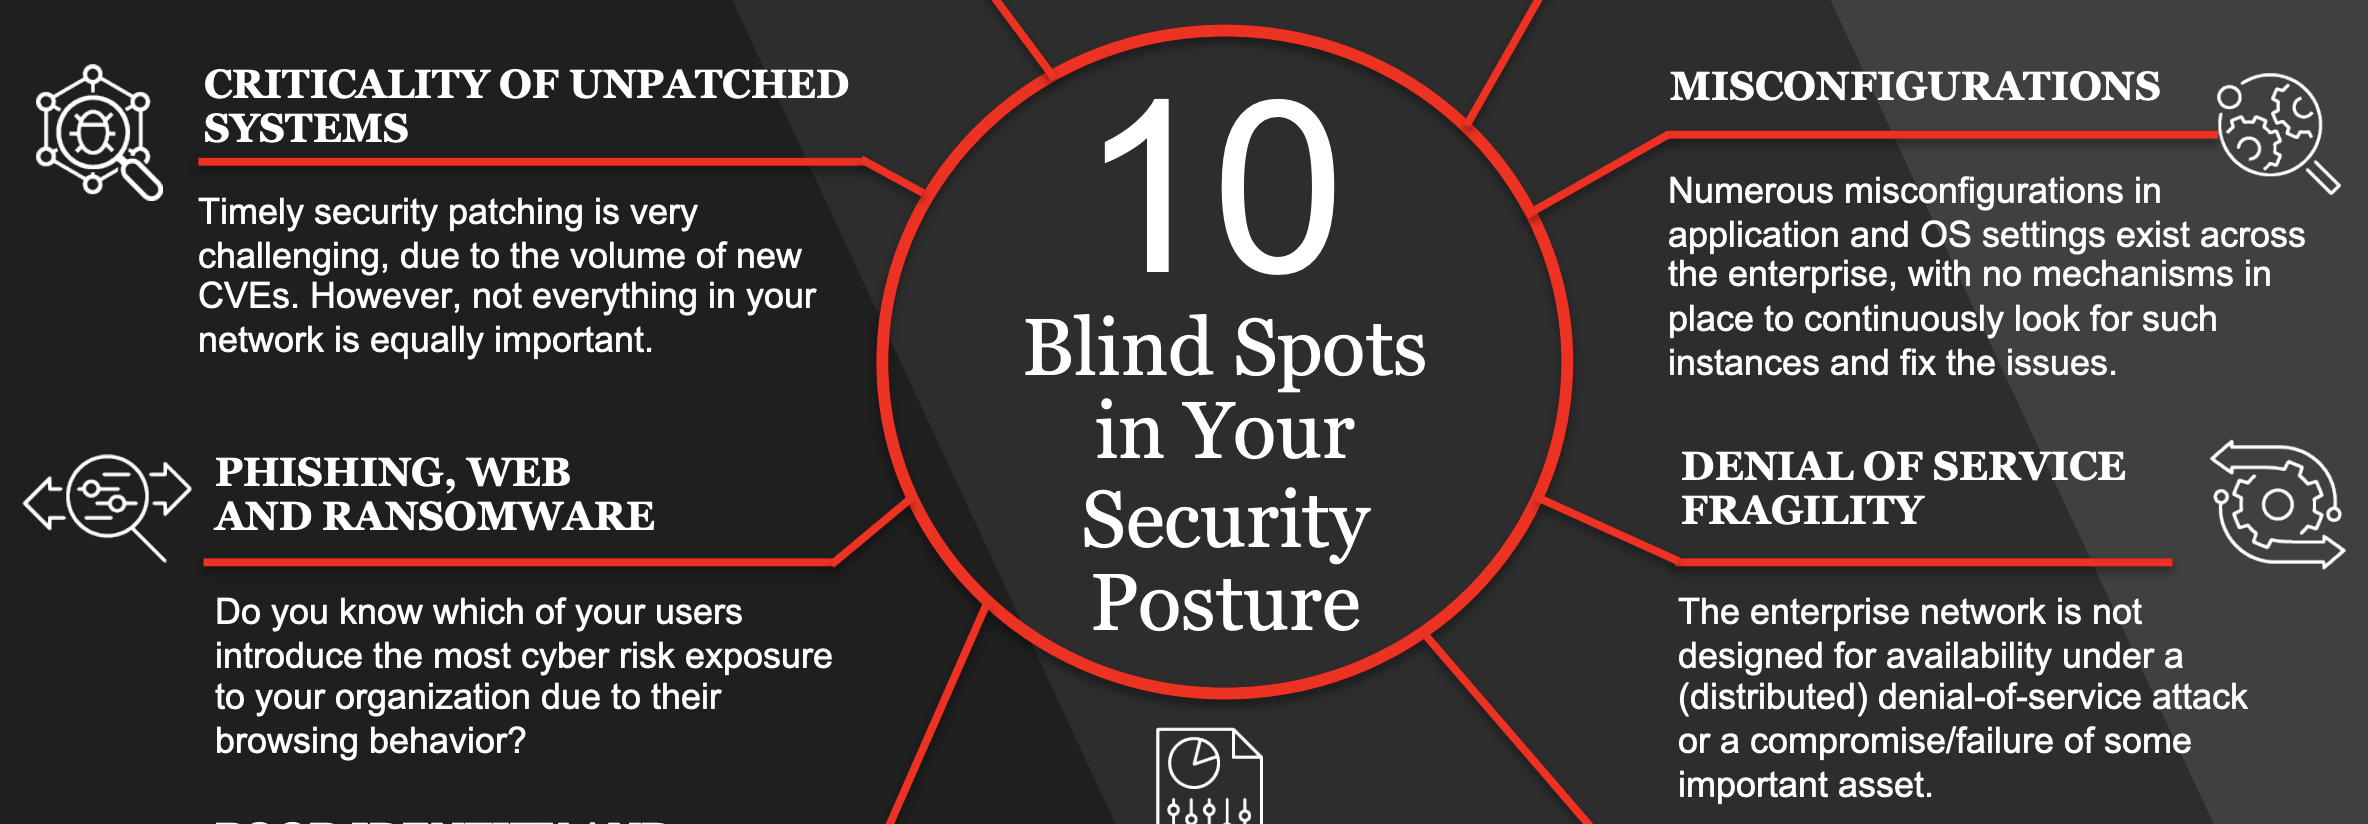 10 Blindspots in Your Security Posture (infographic)